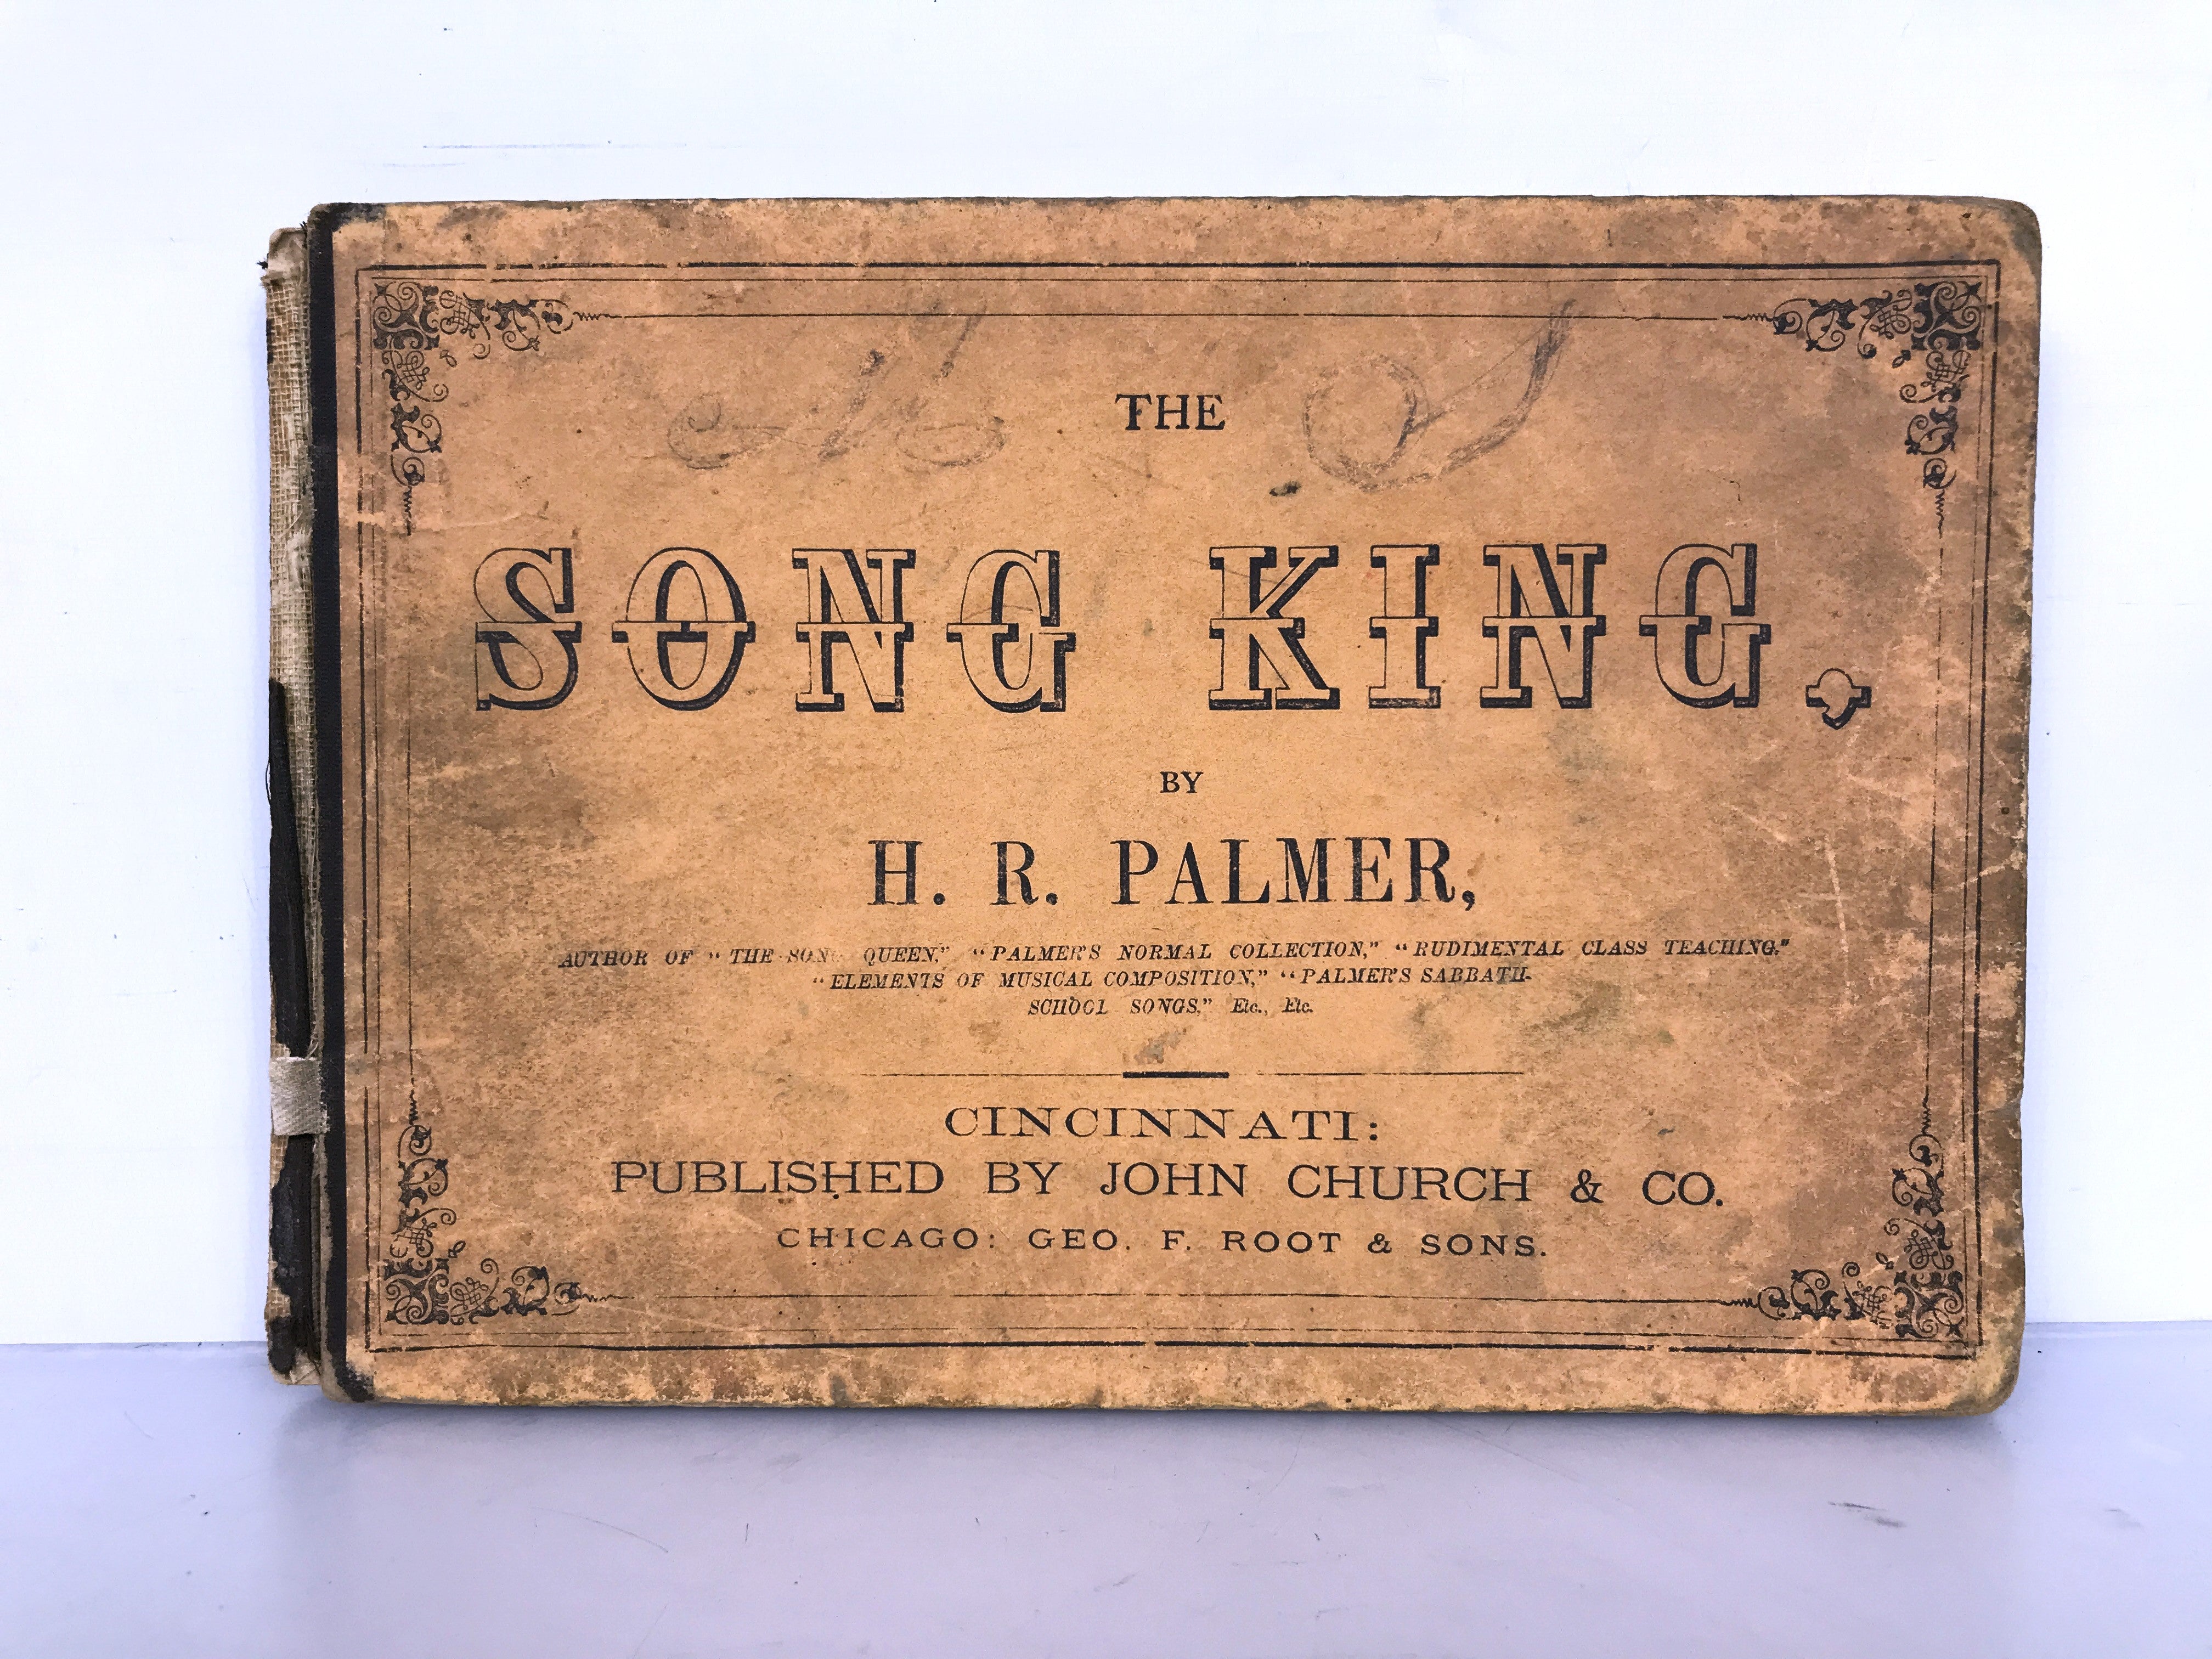 Lot of 2 Antique Song Books by H.R. Palmer 1872 HC, 1874 SC